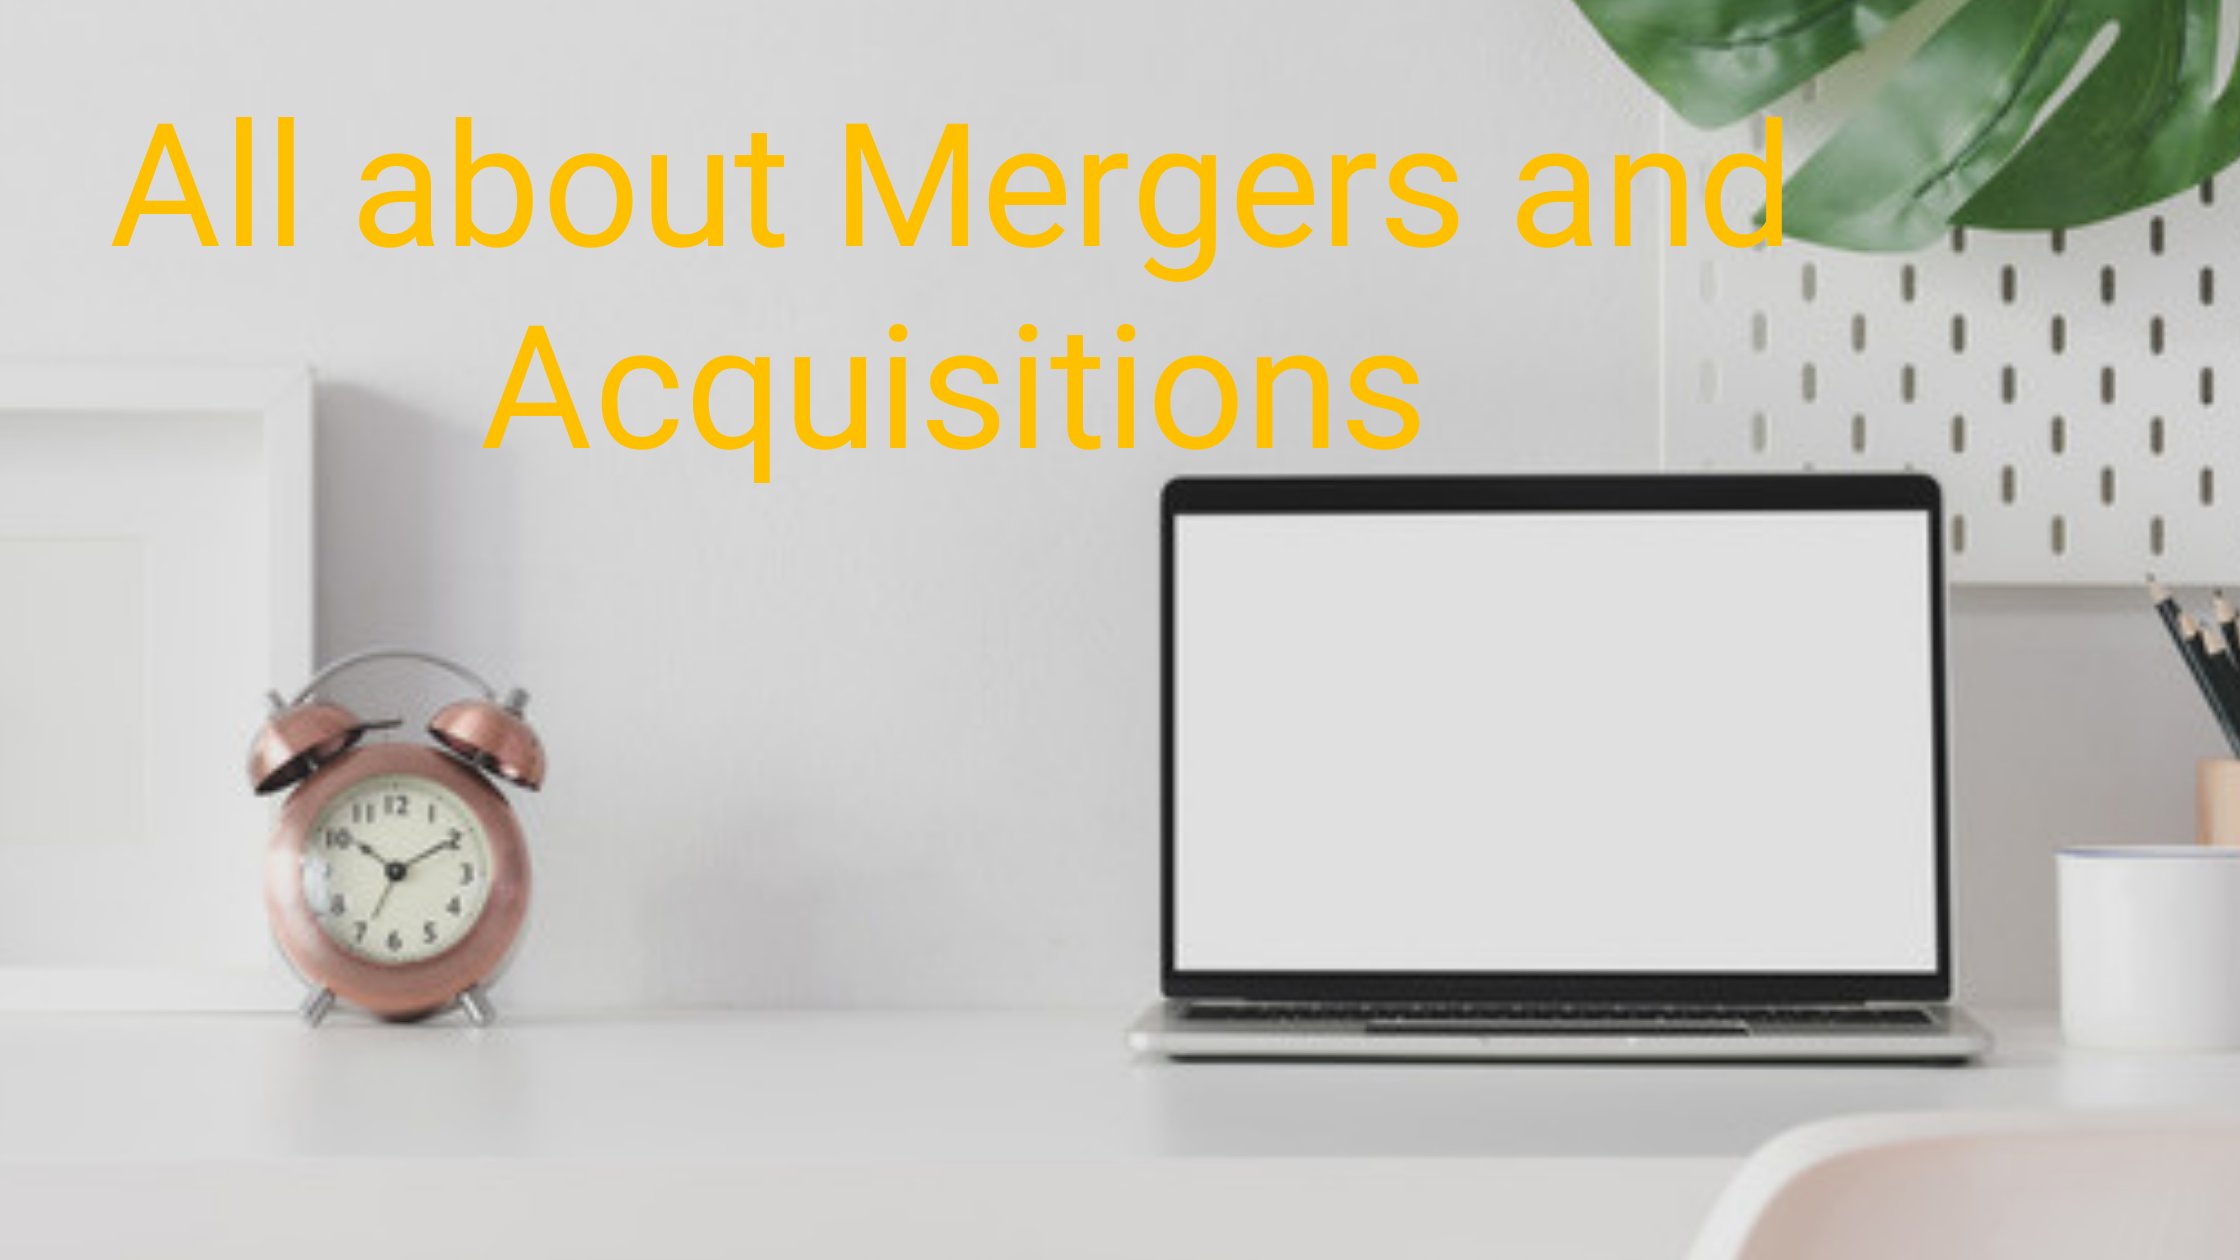 All about Mergers and Acquisitions